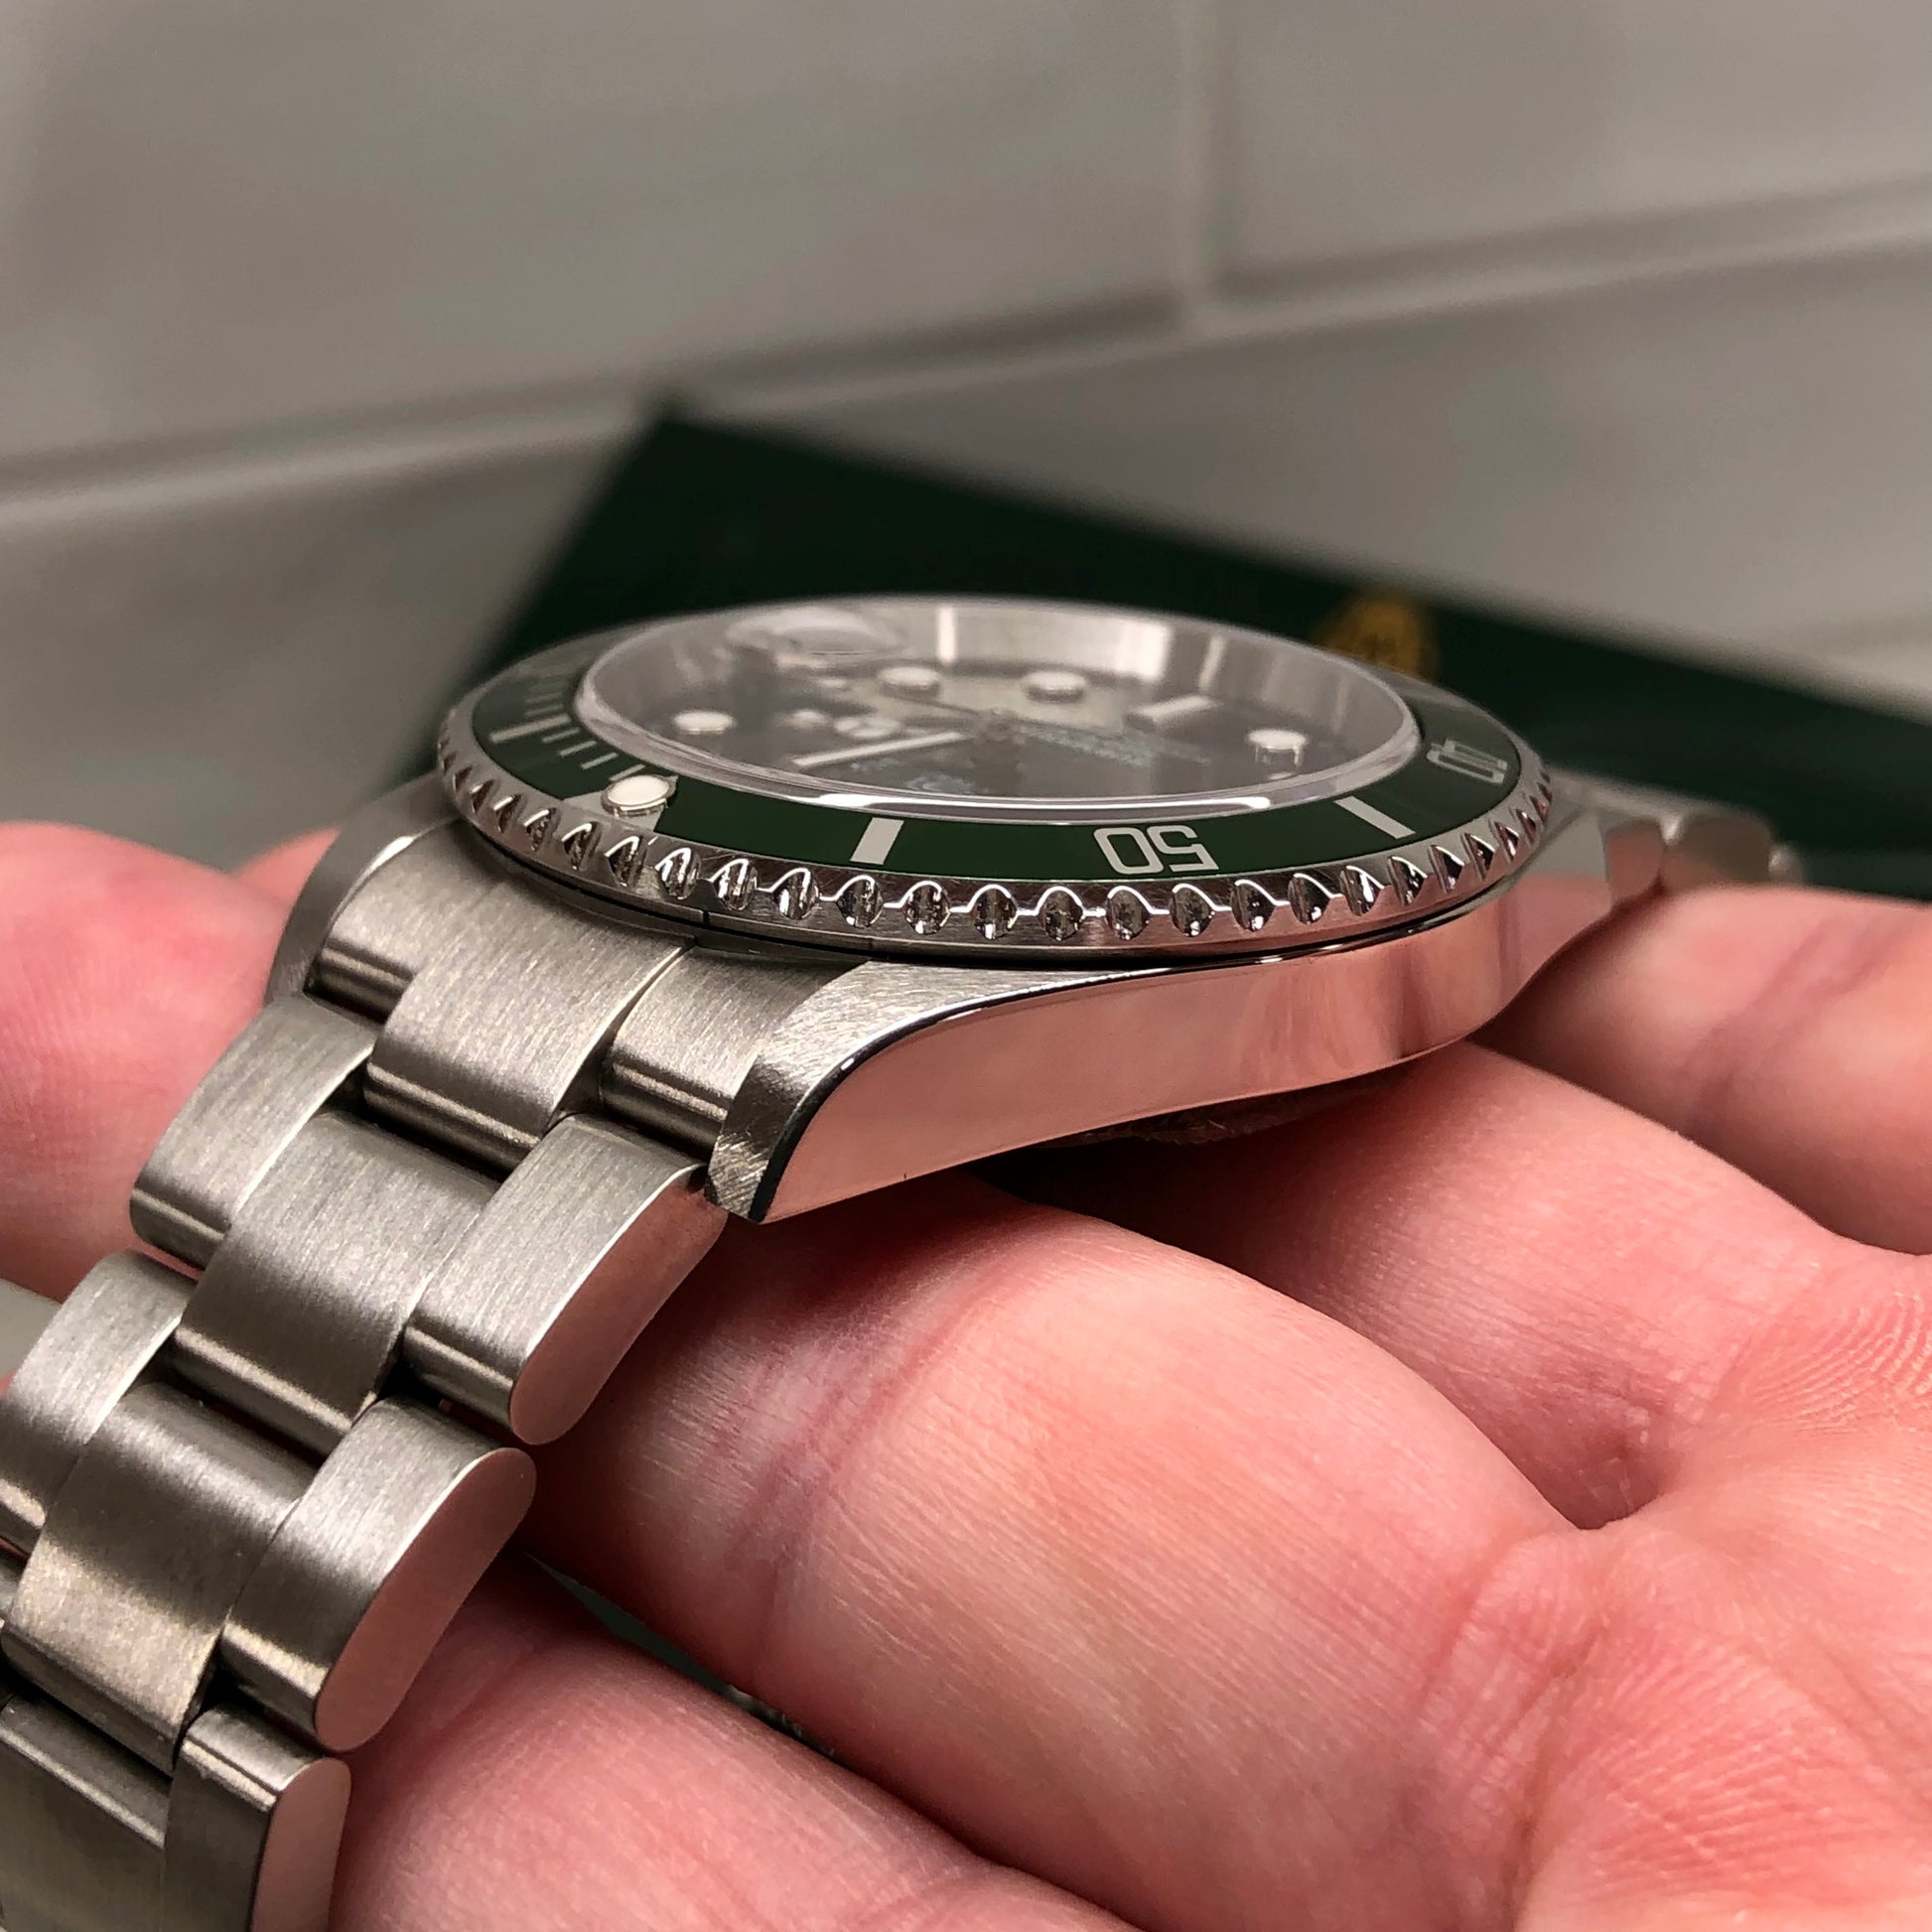 2004 Rolex Submariner 16610LV Kermit Flat Four Green Bezel 50th Anniversary Wristwatch with Box and Papers - Hashtag Watch Company